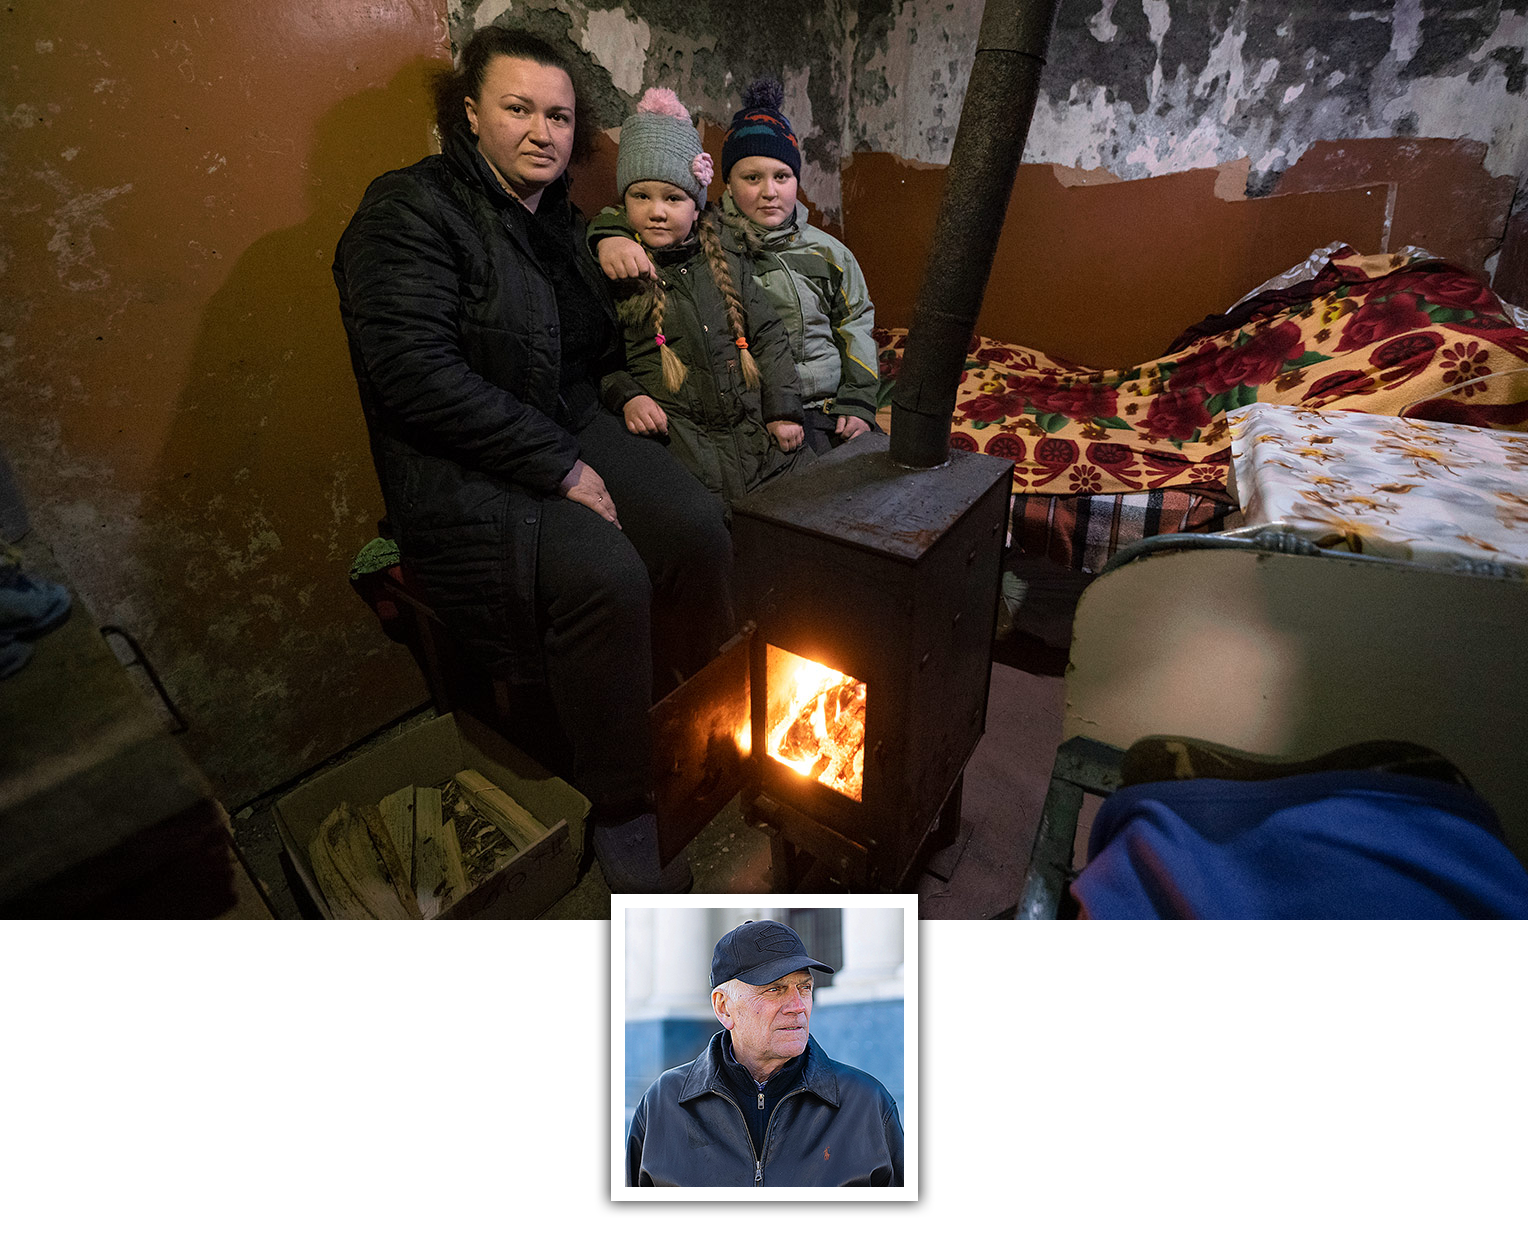 Family warms by stove provided by Samaritan's Purse